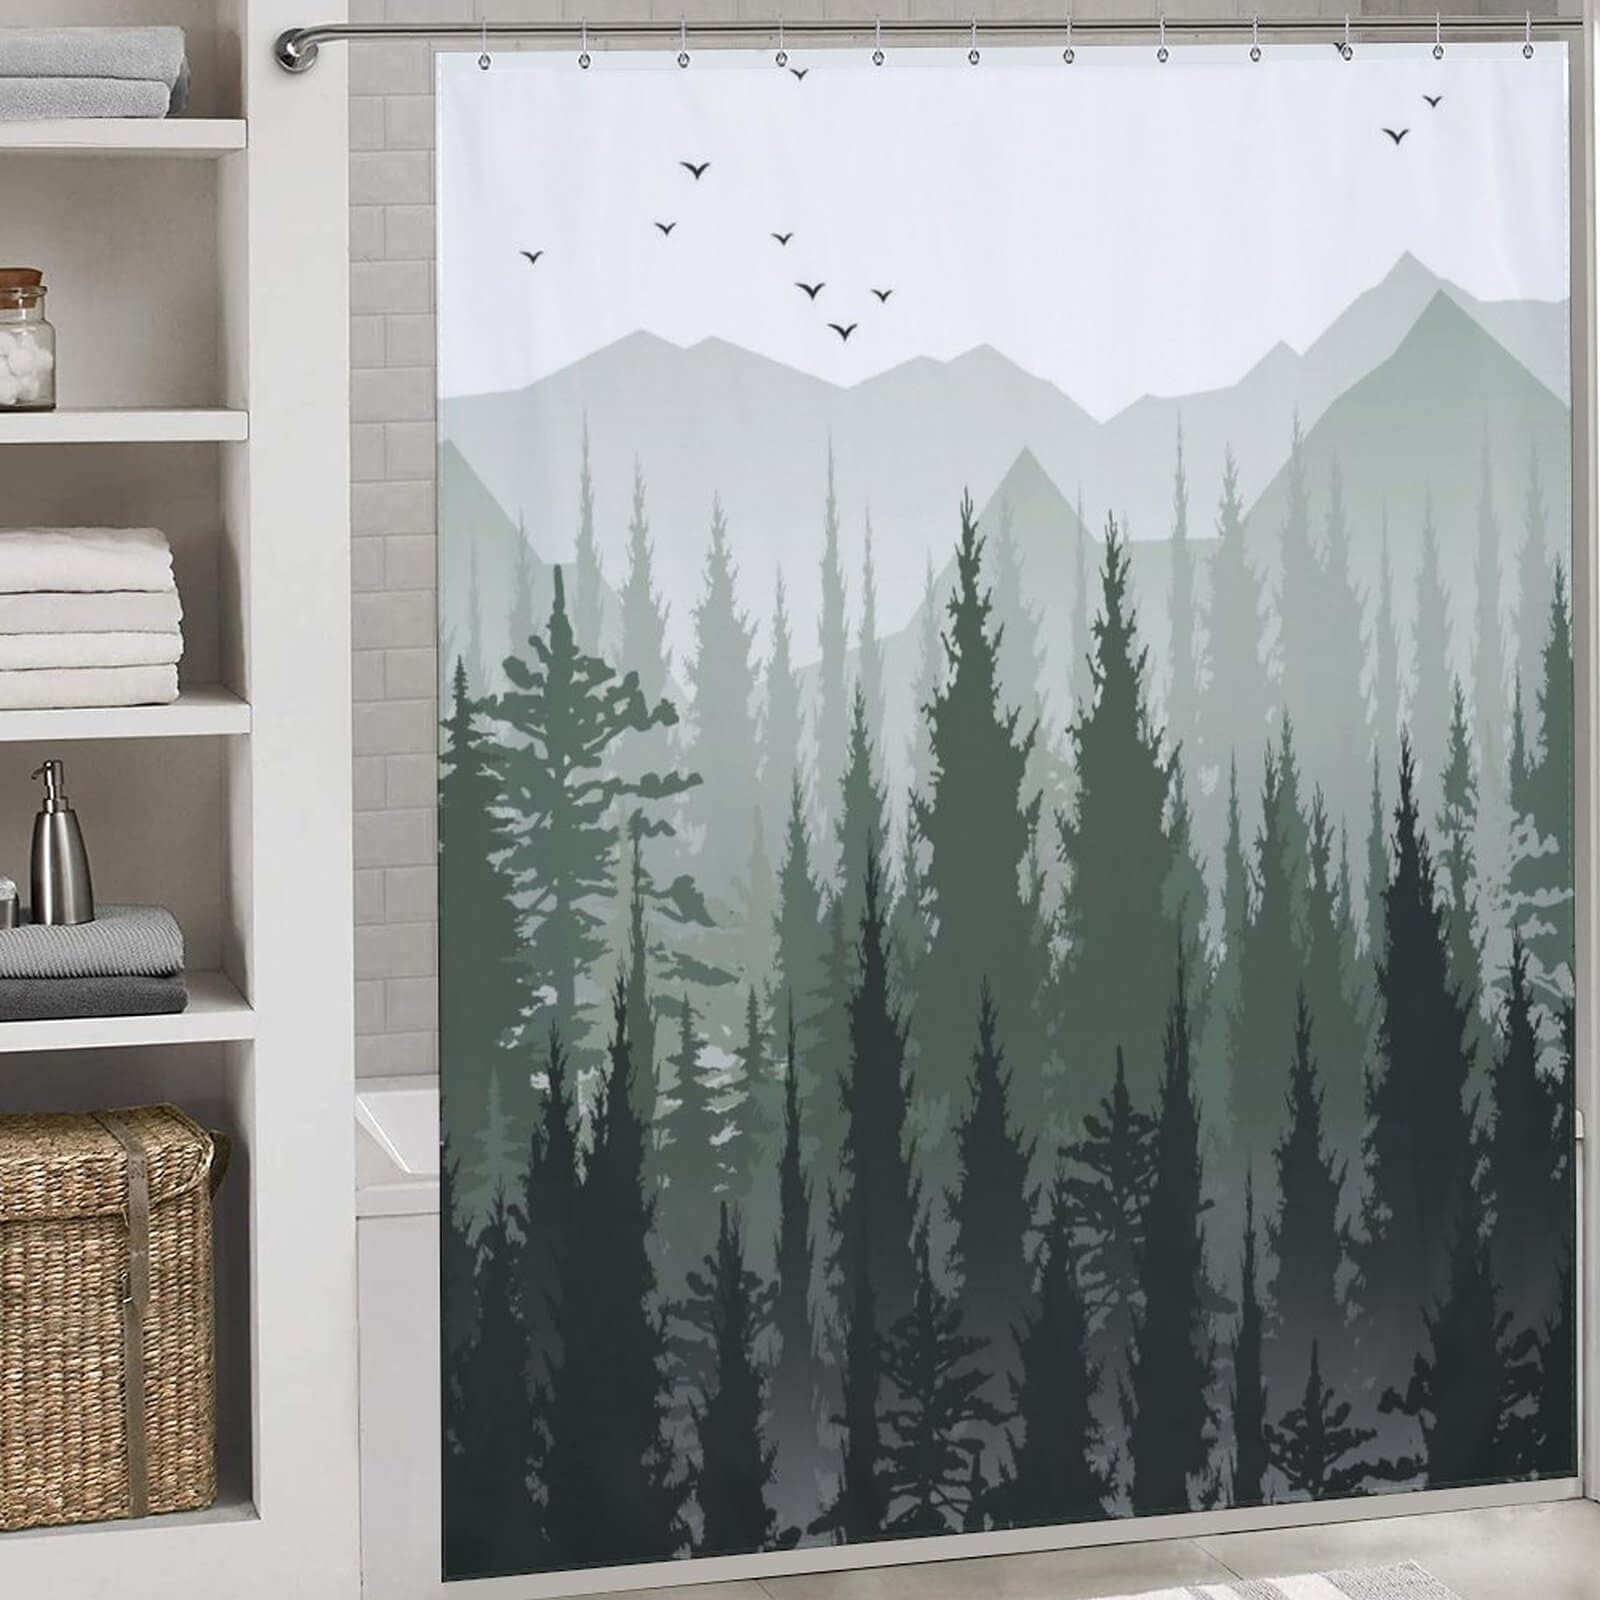 A Green Misty Forest Shower Curtain-Cottoncat adorned with trees and birds that is both waterproof and functional.